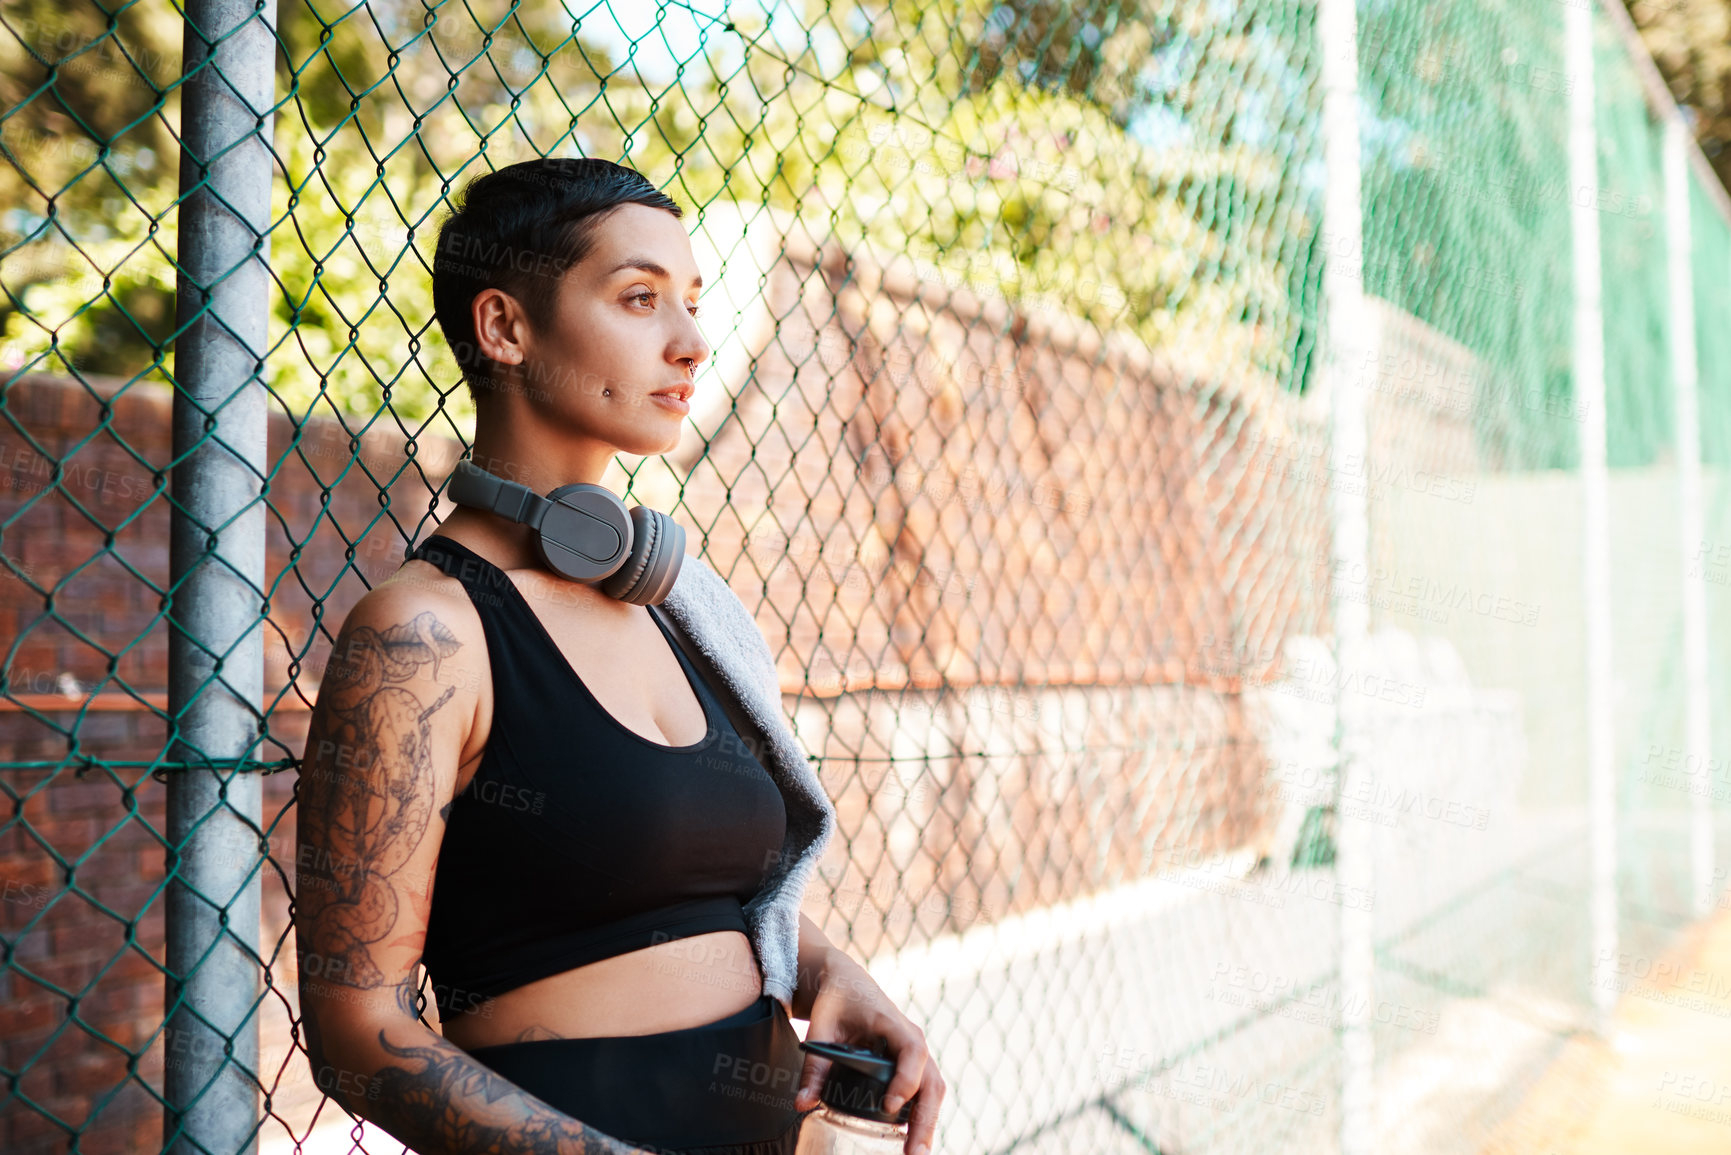 Buy stock photo Shot of a sporty young woman taking a break while standing against a fence outdoors